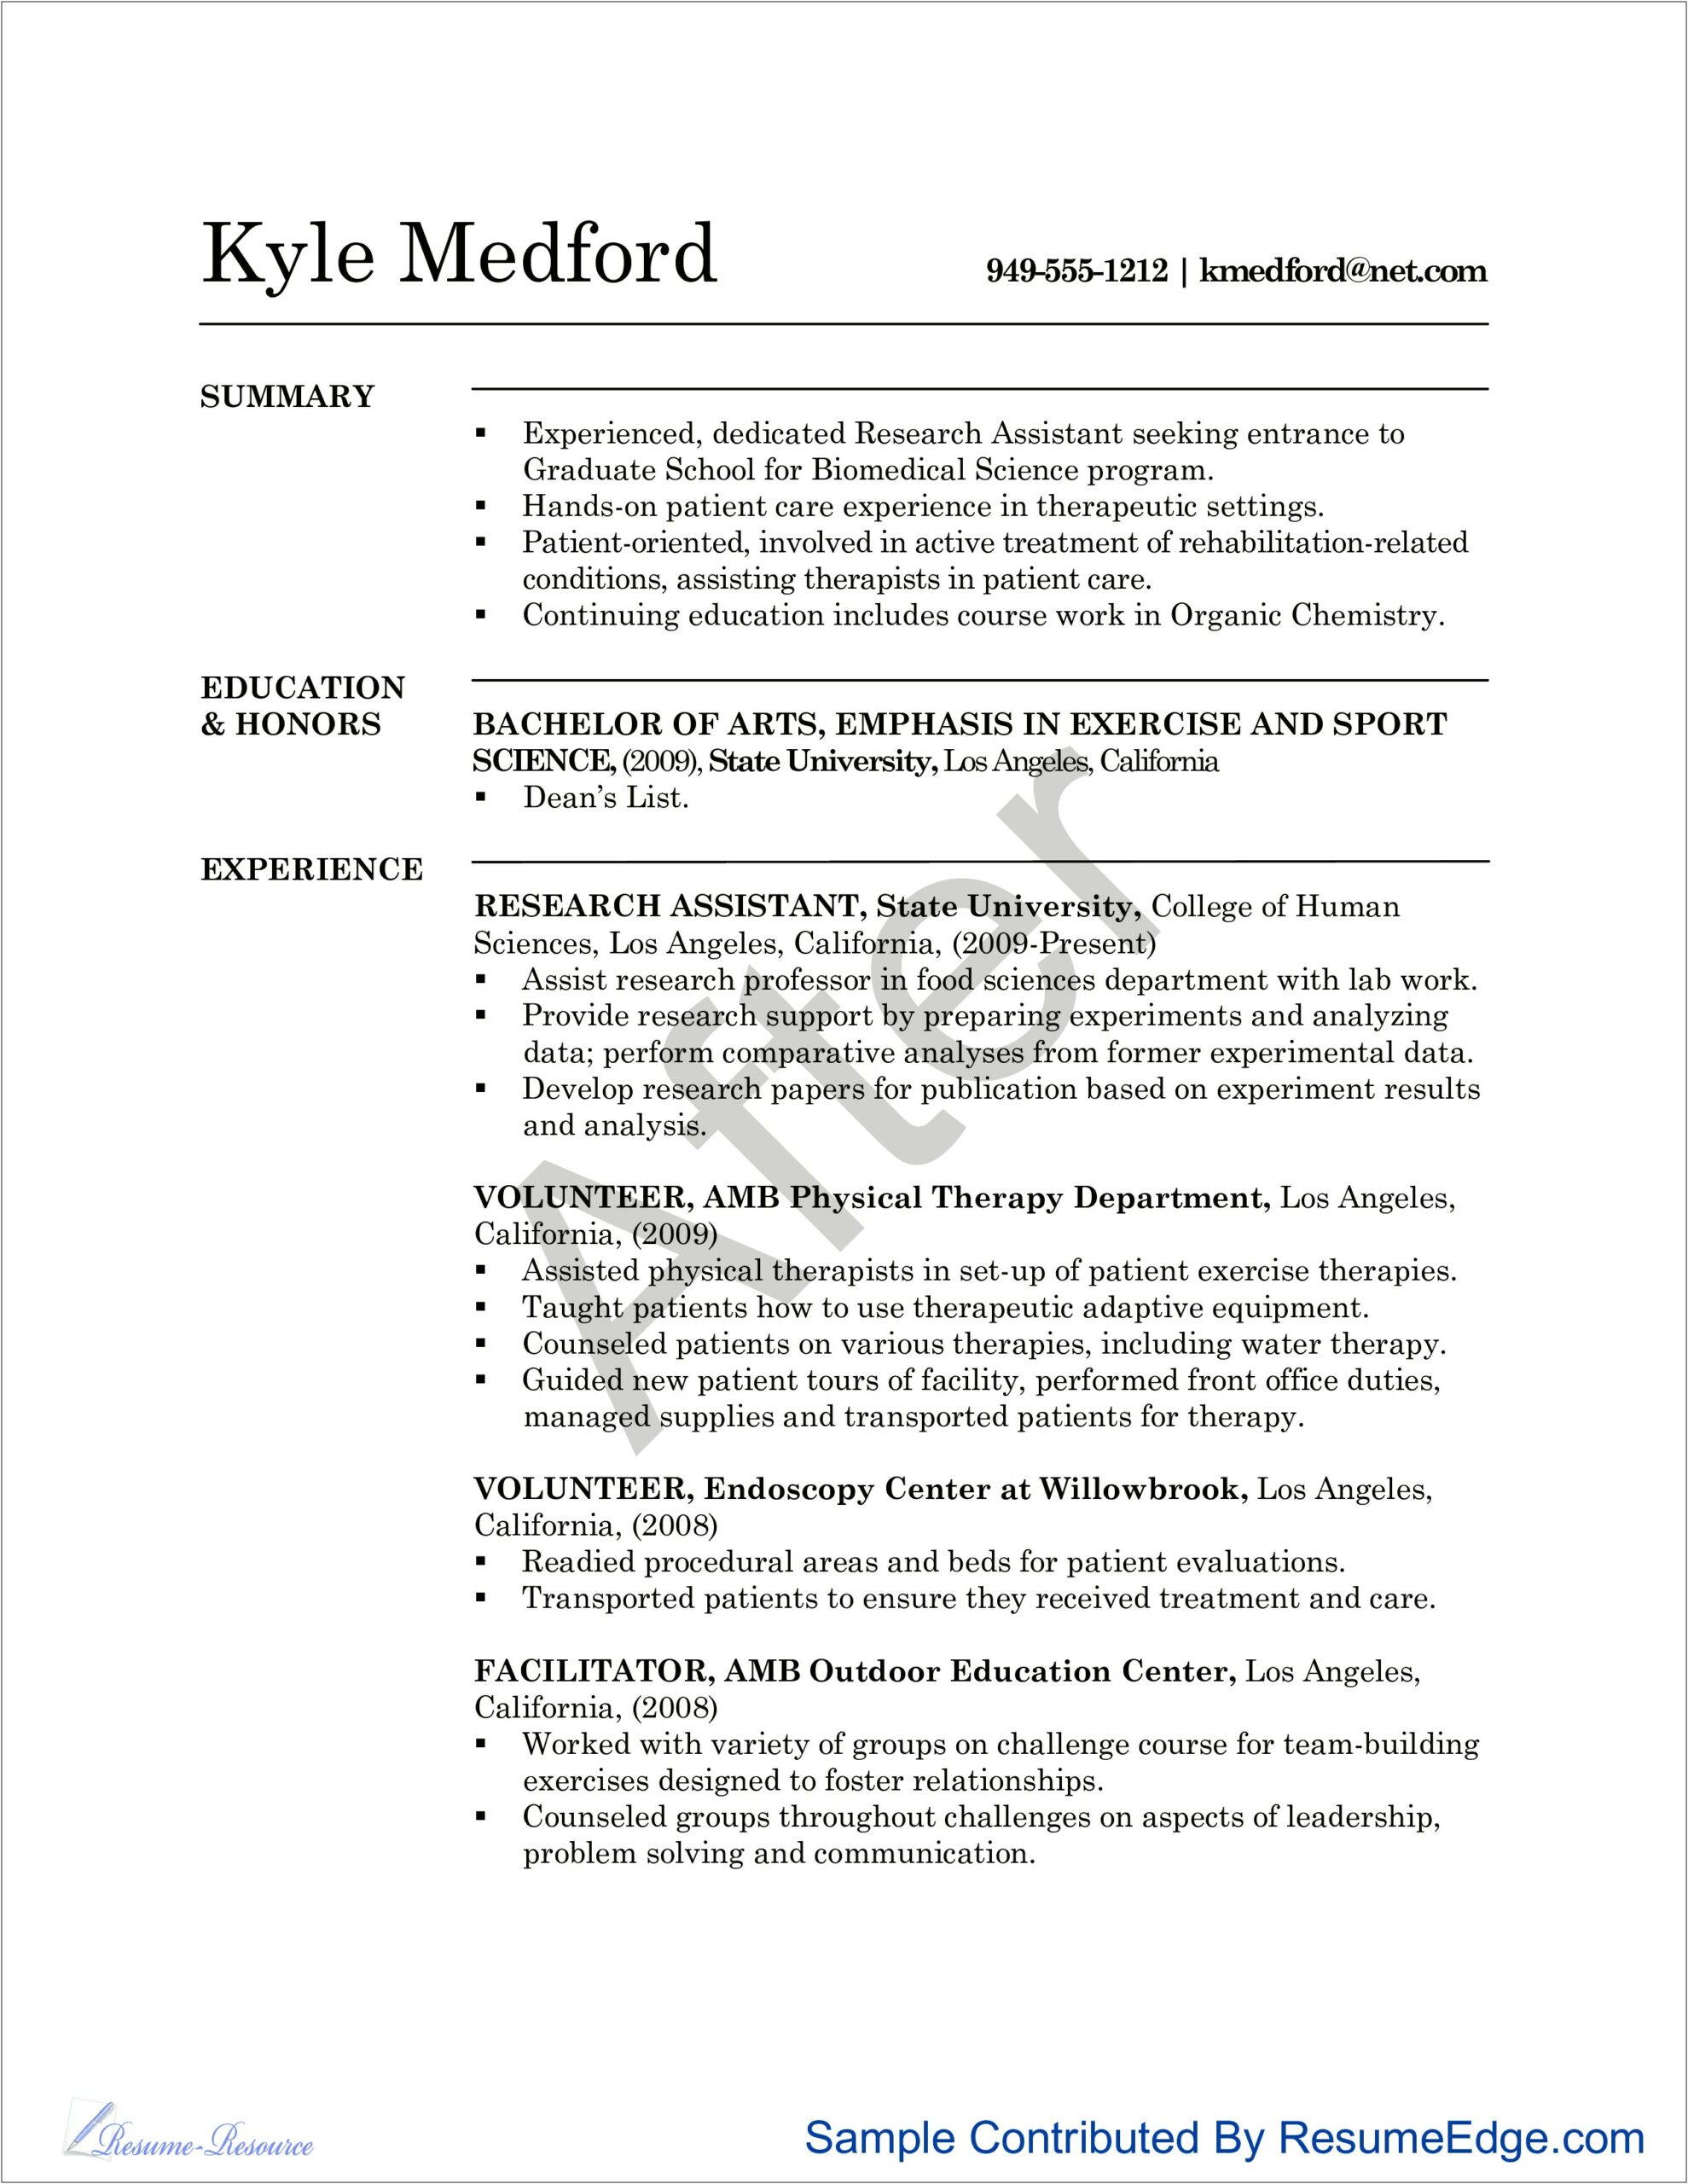 Sample Resume For An Exercise Science Major